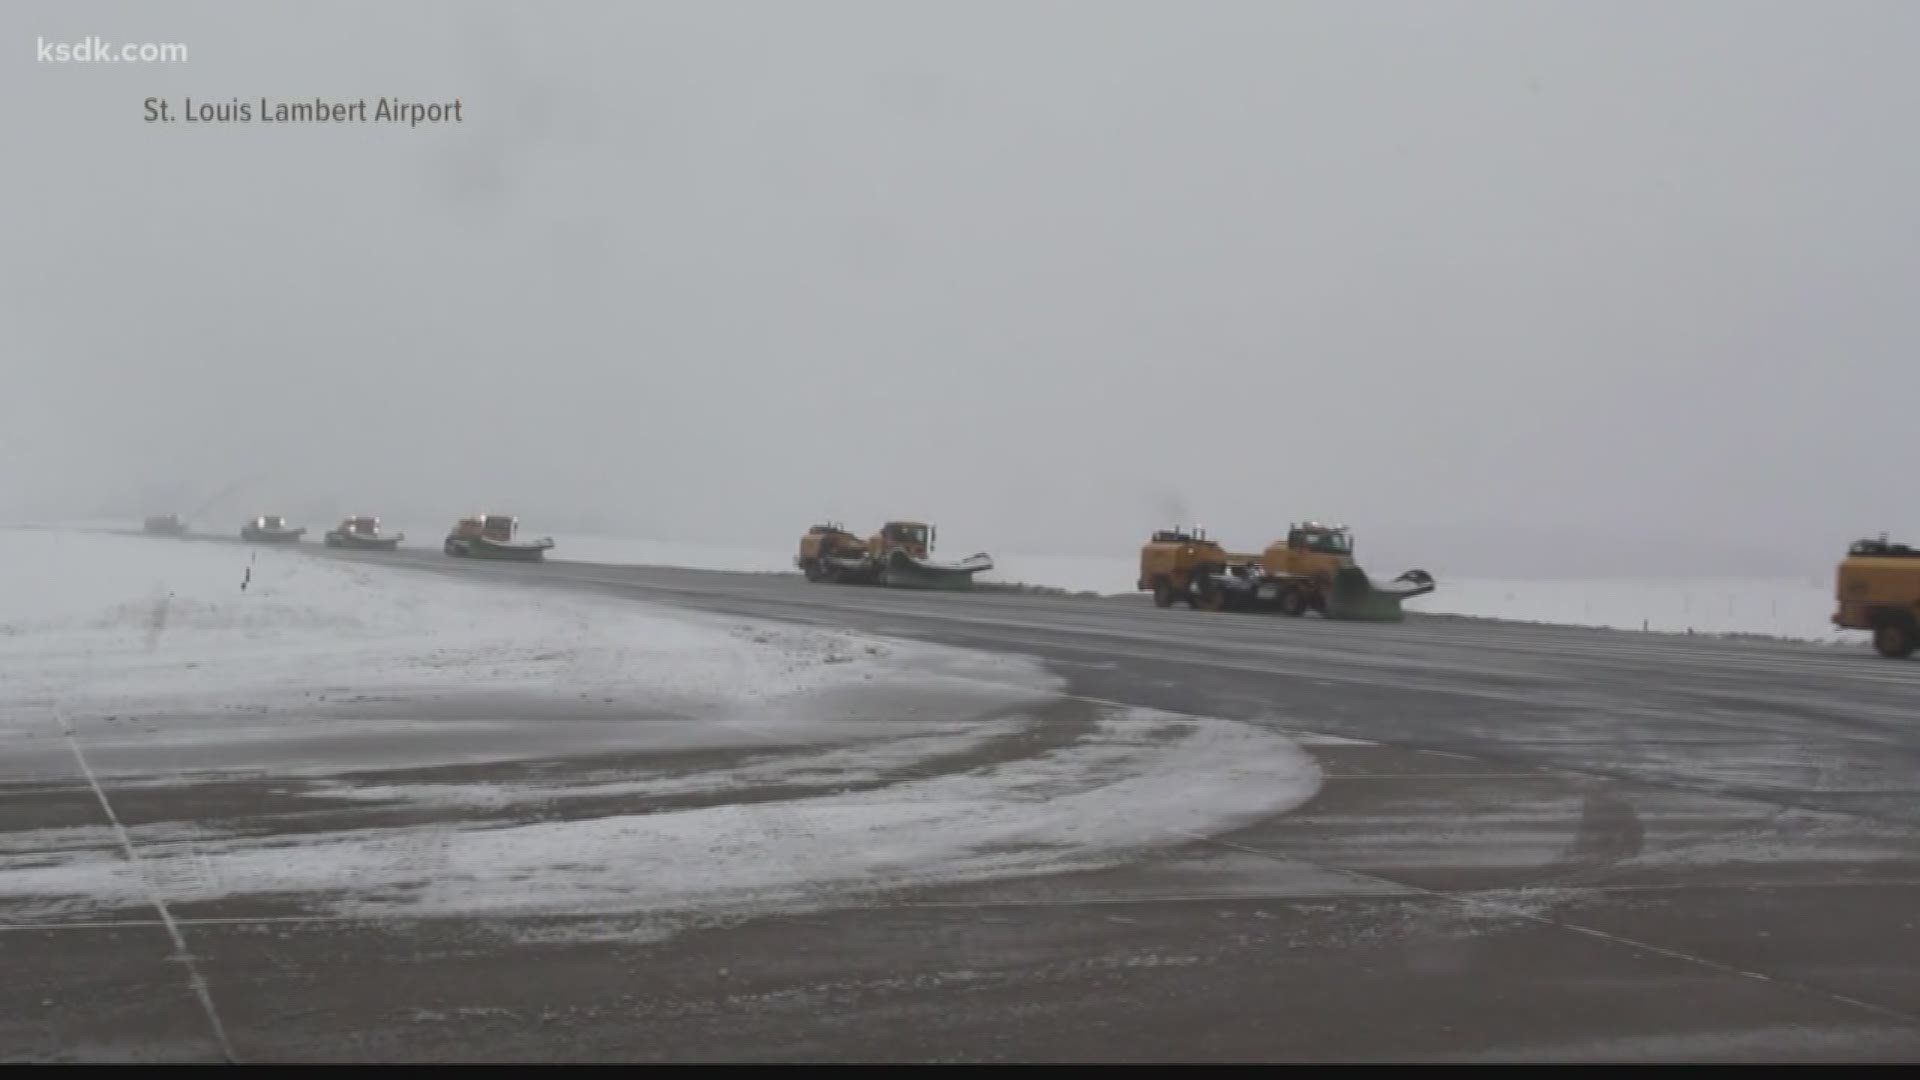 St. Louis Lambert International Airport is in a bit better shape for any winter weather.